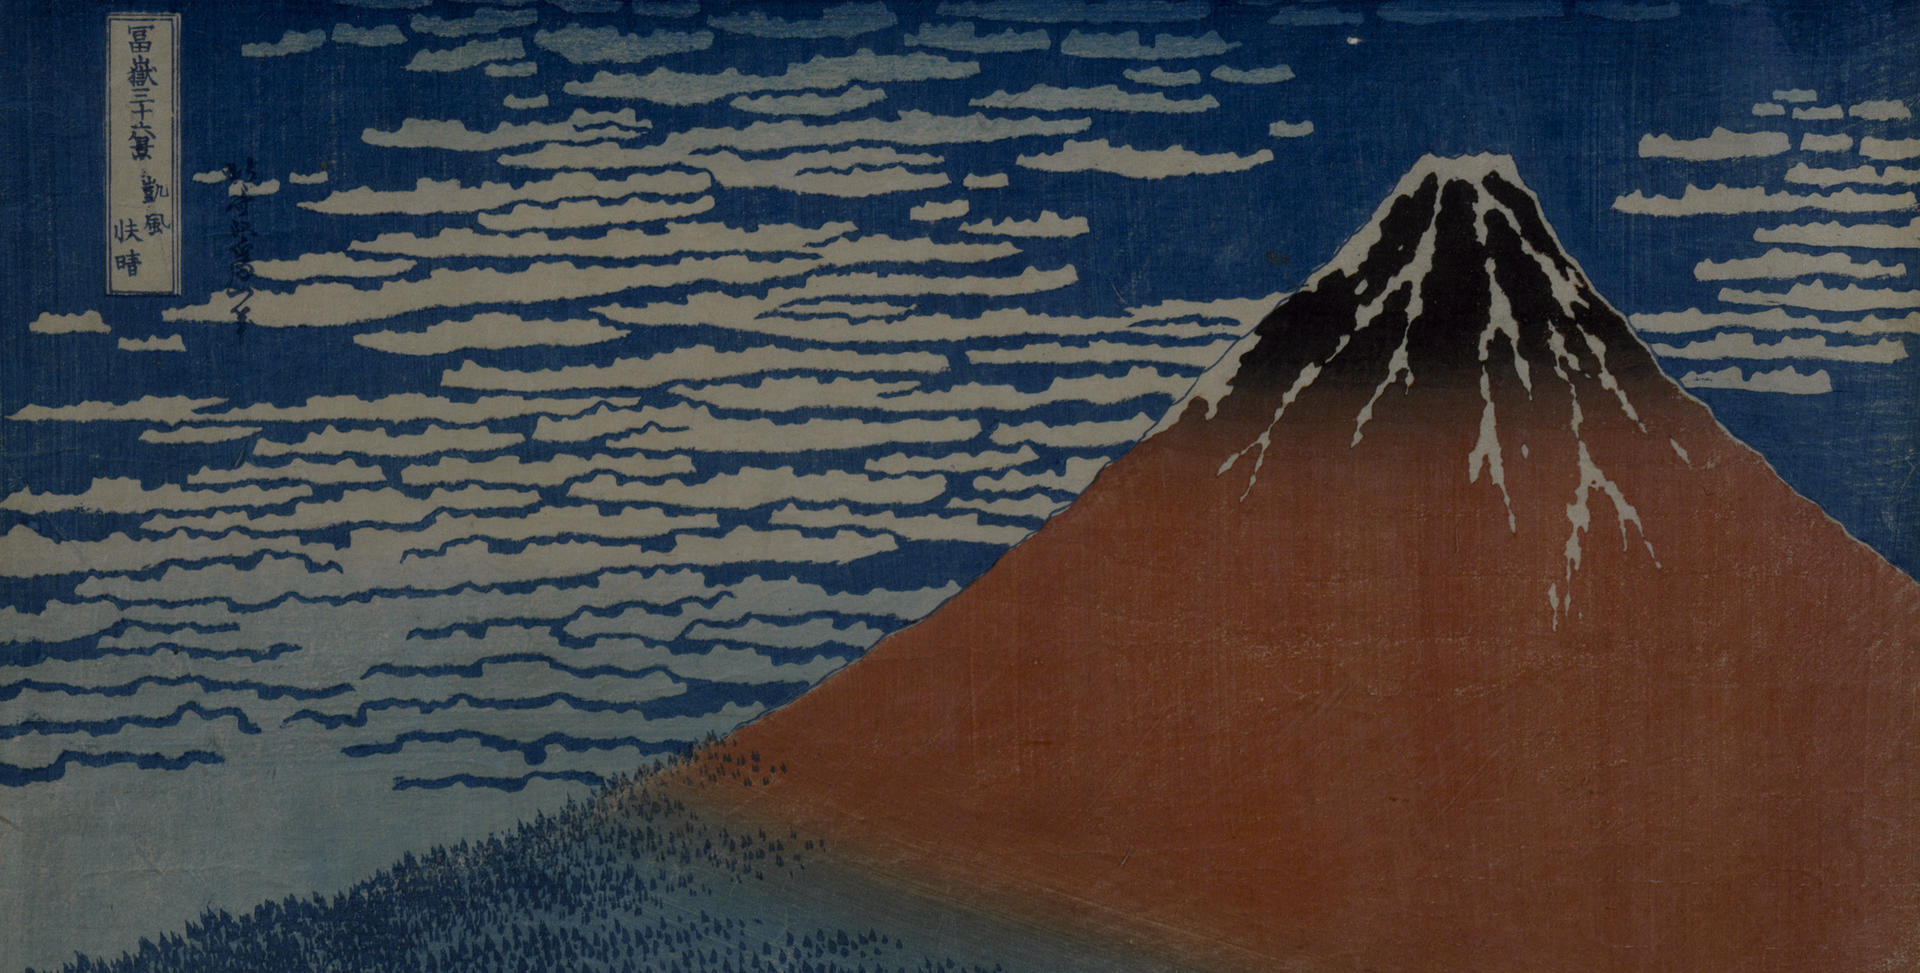 Woodblock print of a large mountain colored red and blue with white clouds and a blue sky behind it. Small trees sit at the base of the mountain. In the top left of the frame, Japanese text is in a white rectangle.